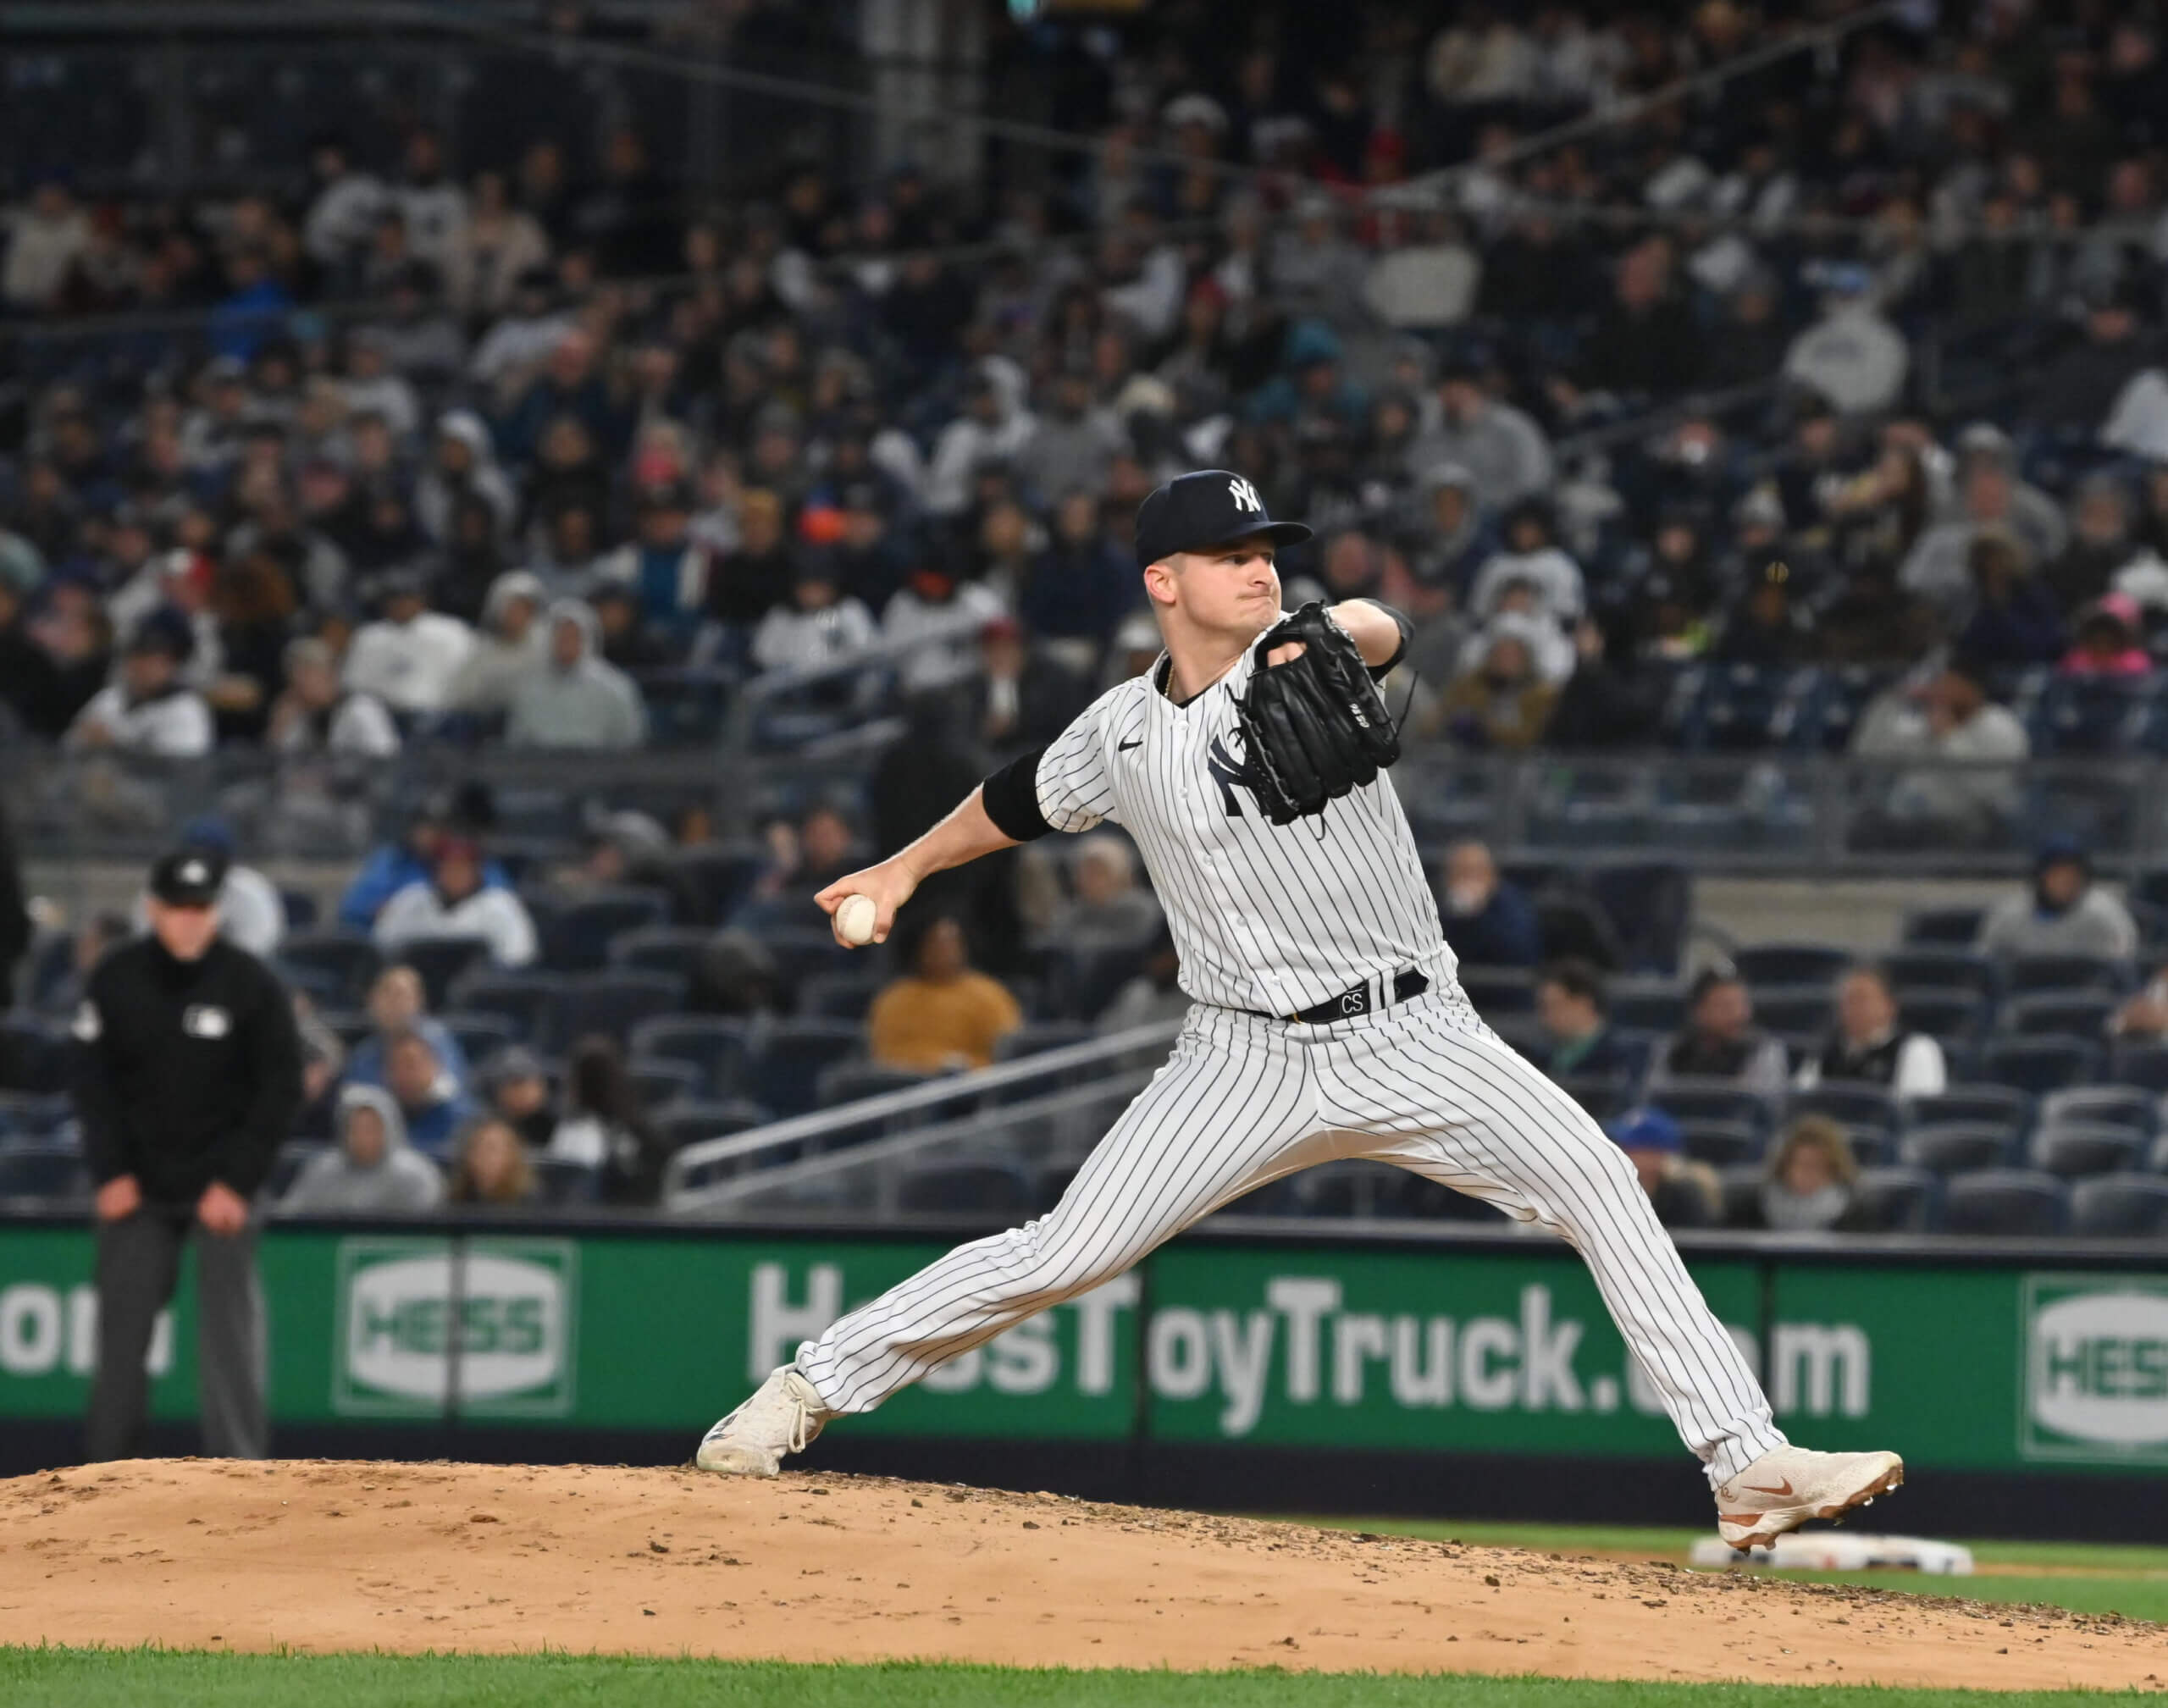 Clark Schmidt pitches during his start on the mound for the Yankees at Yankee Stadium on Aprril 18, 2023.